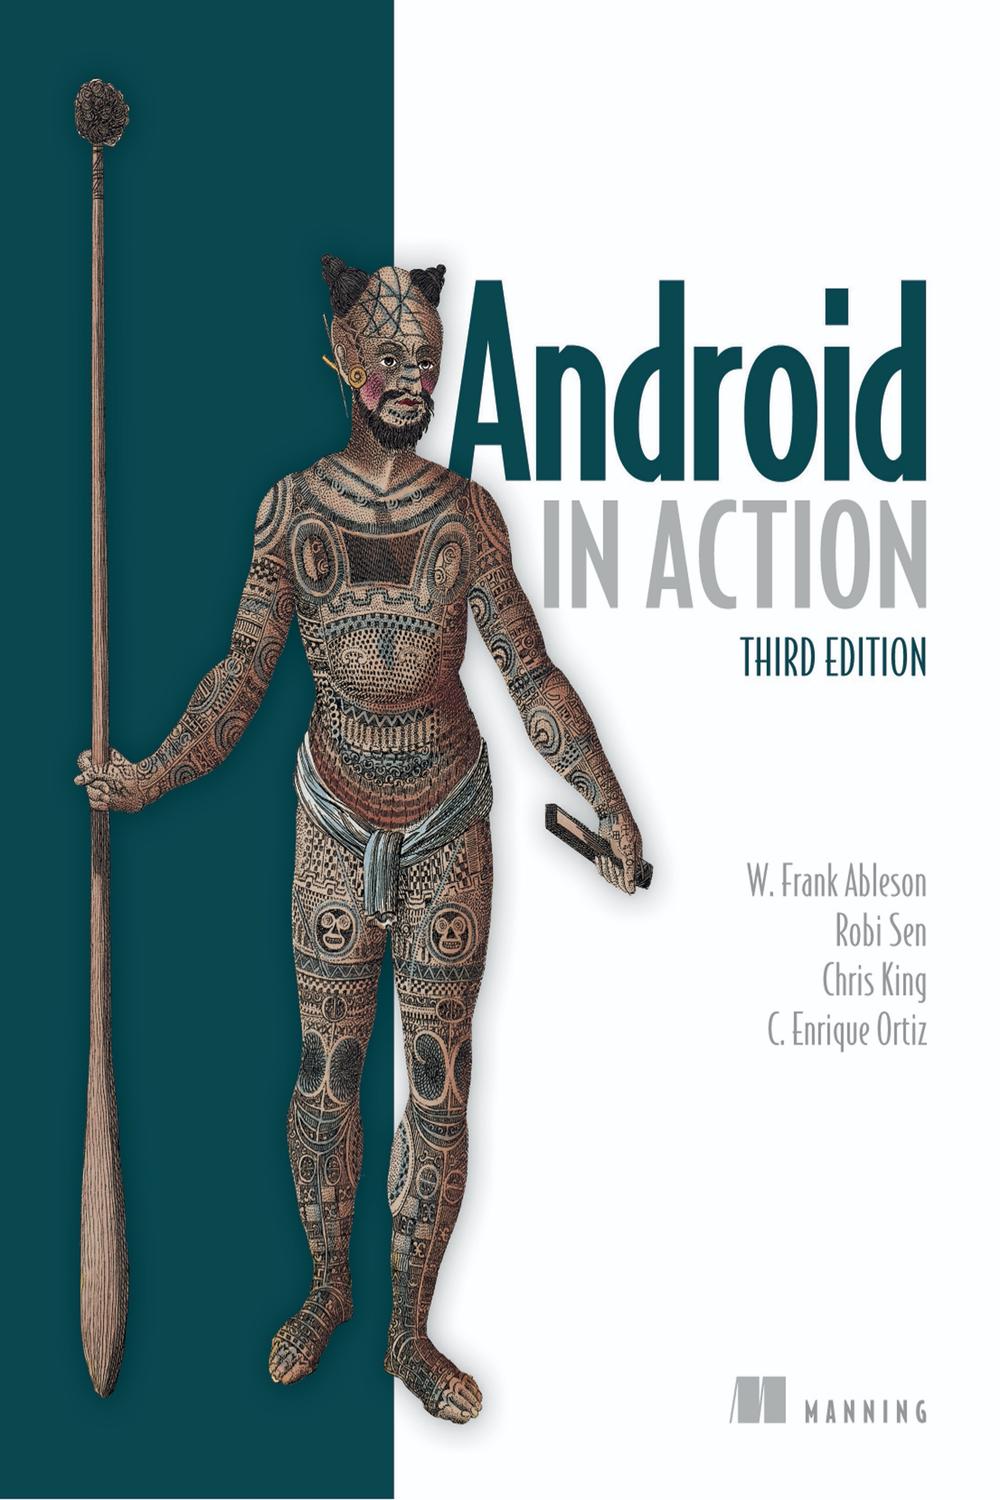 Android in Action, Third Edition - Chris King, Frank Ableson, C. Enrique Ortiz